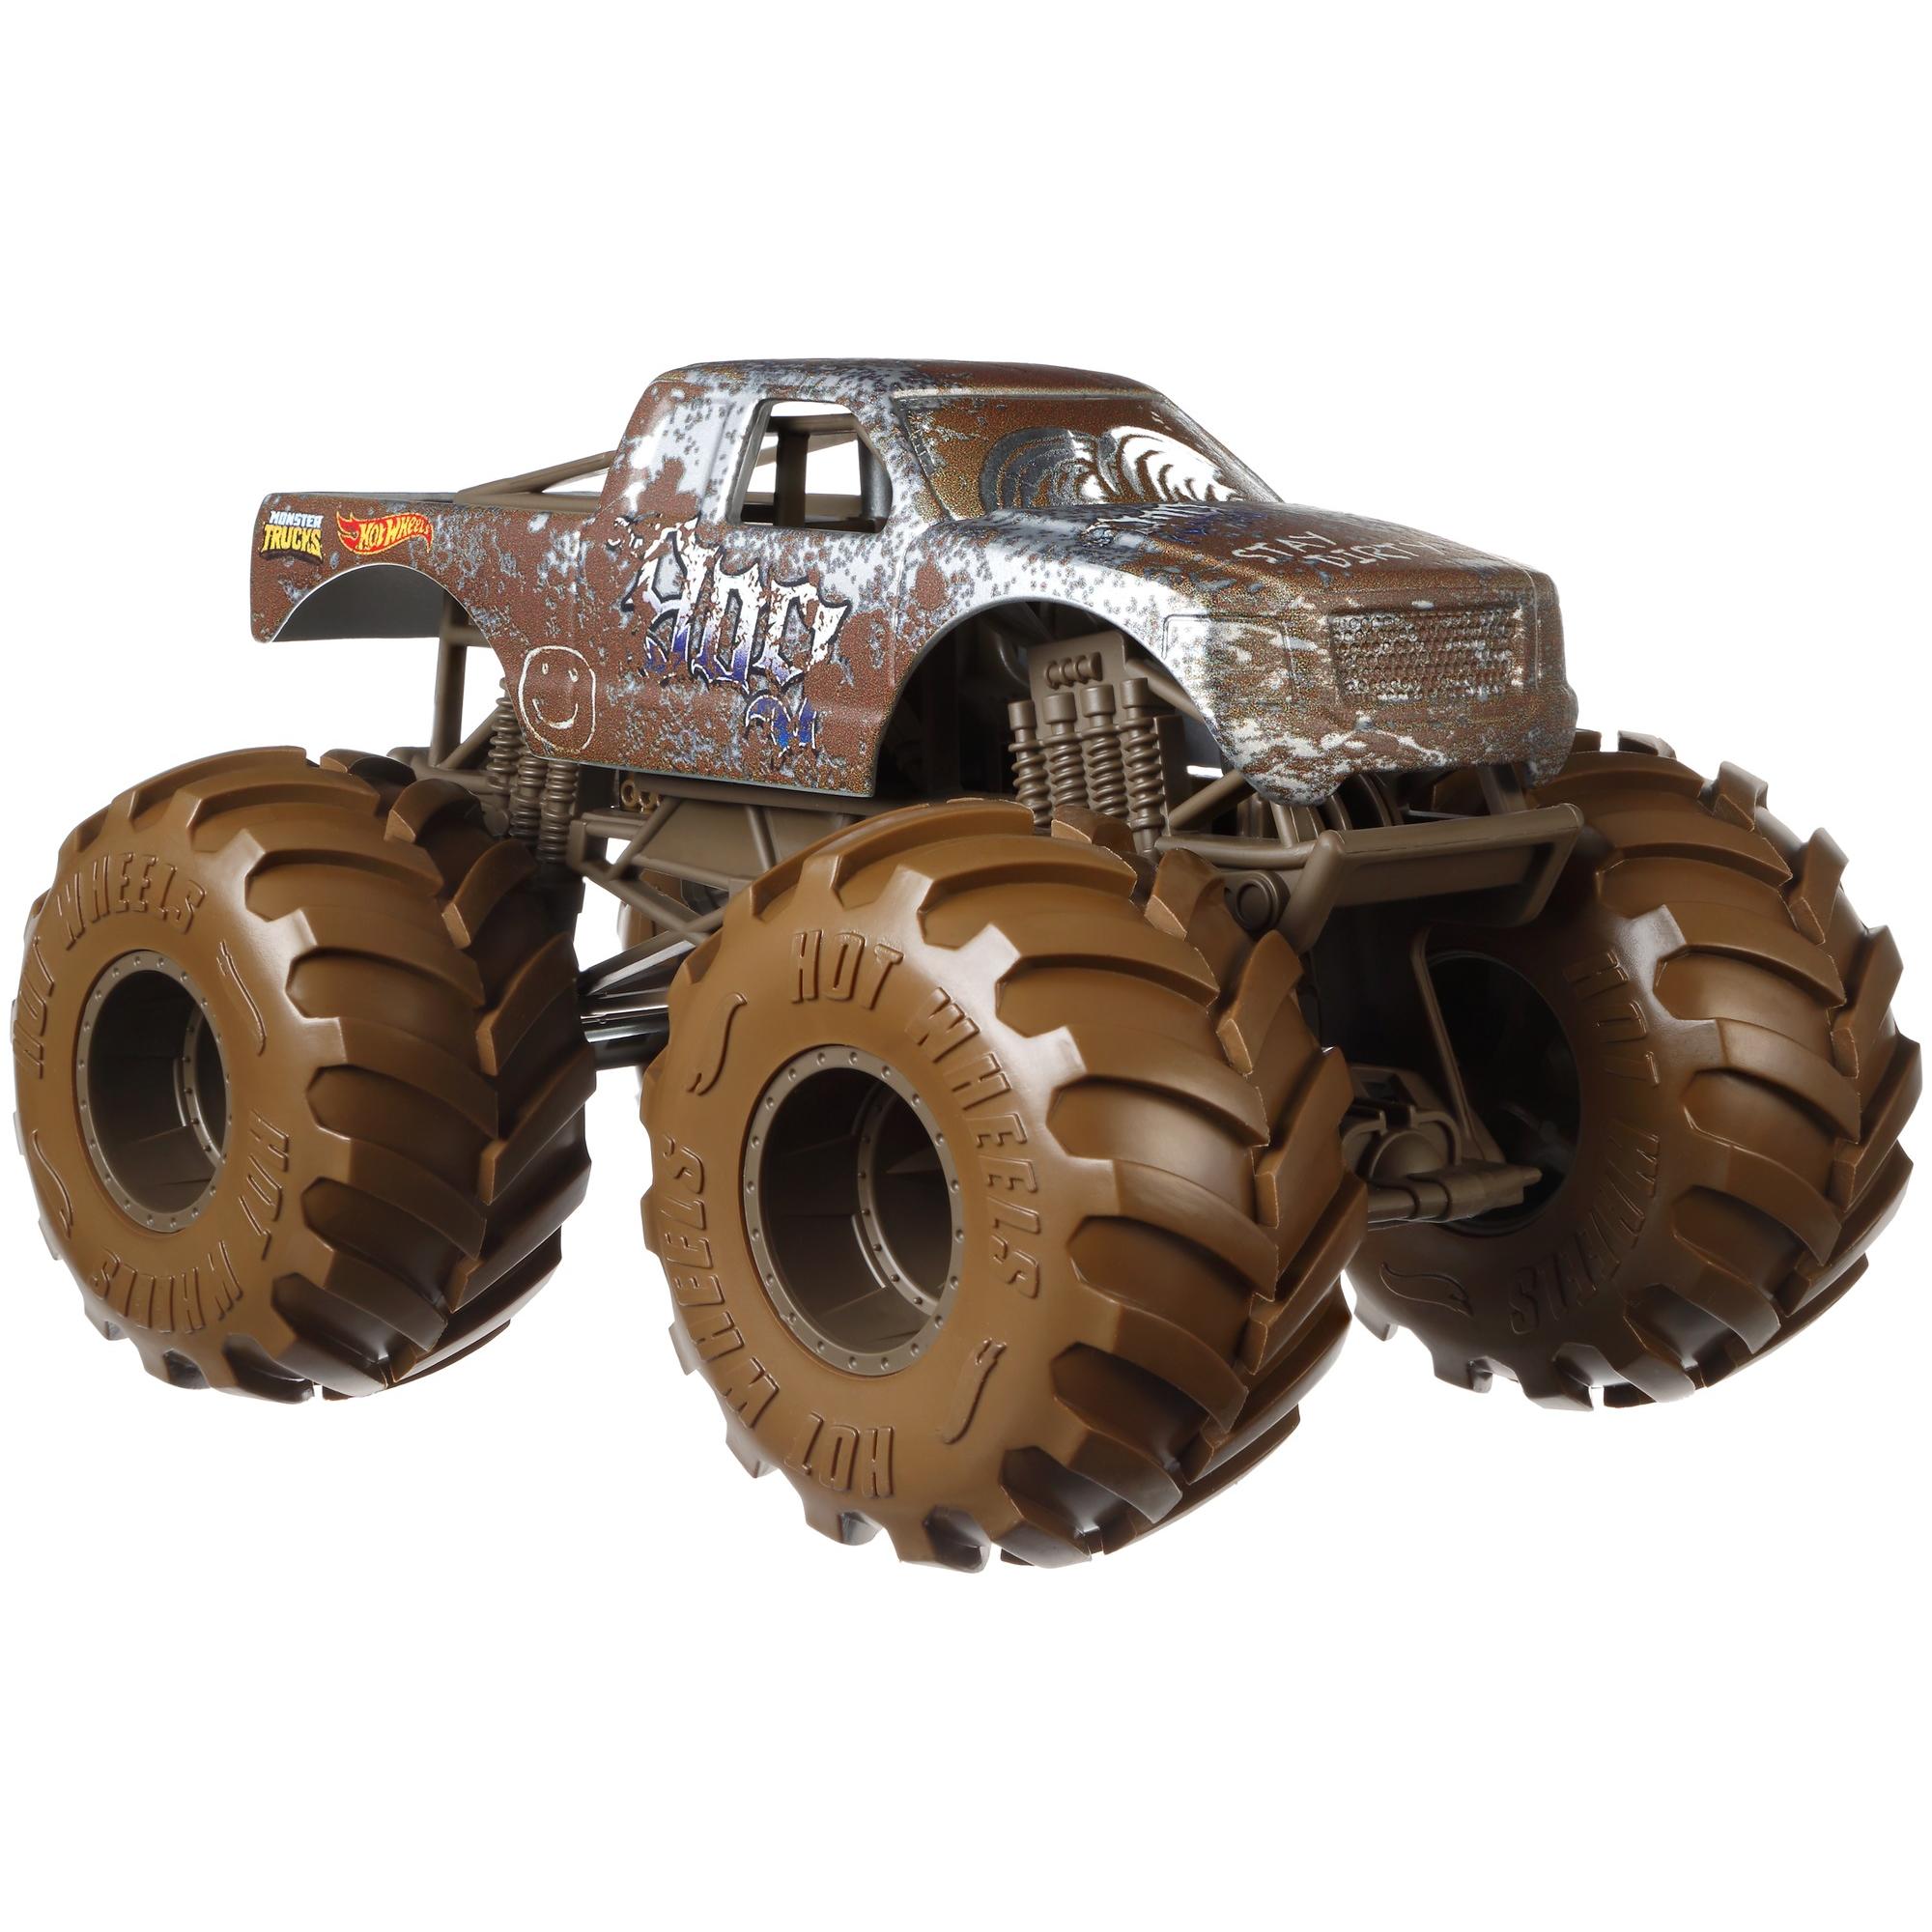 Hot Wheels Monster Trucks 1:24 Scale The 909 Play Vehicle - image 1 of 4